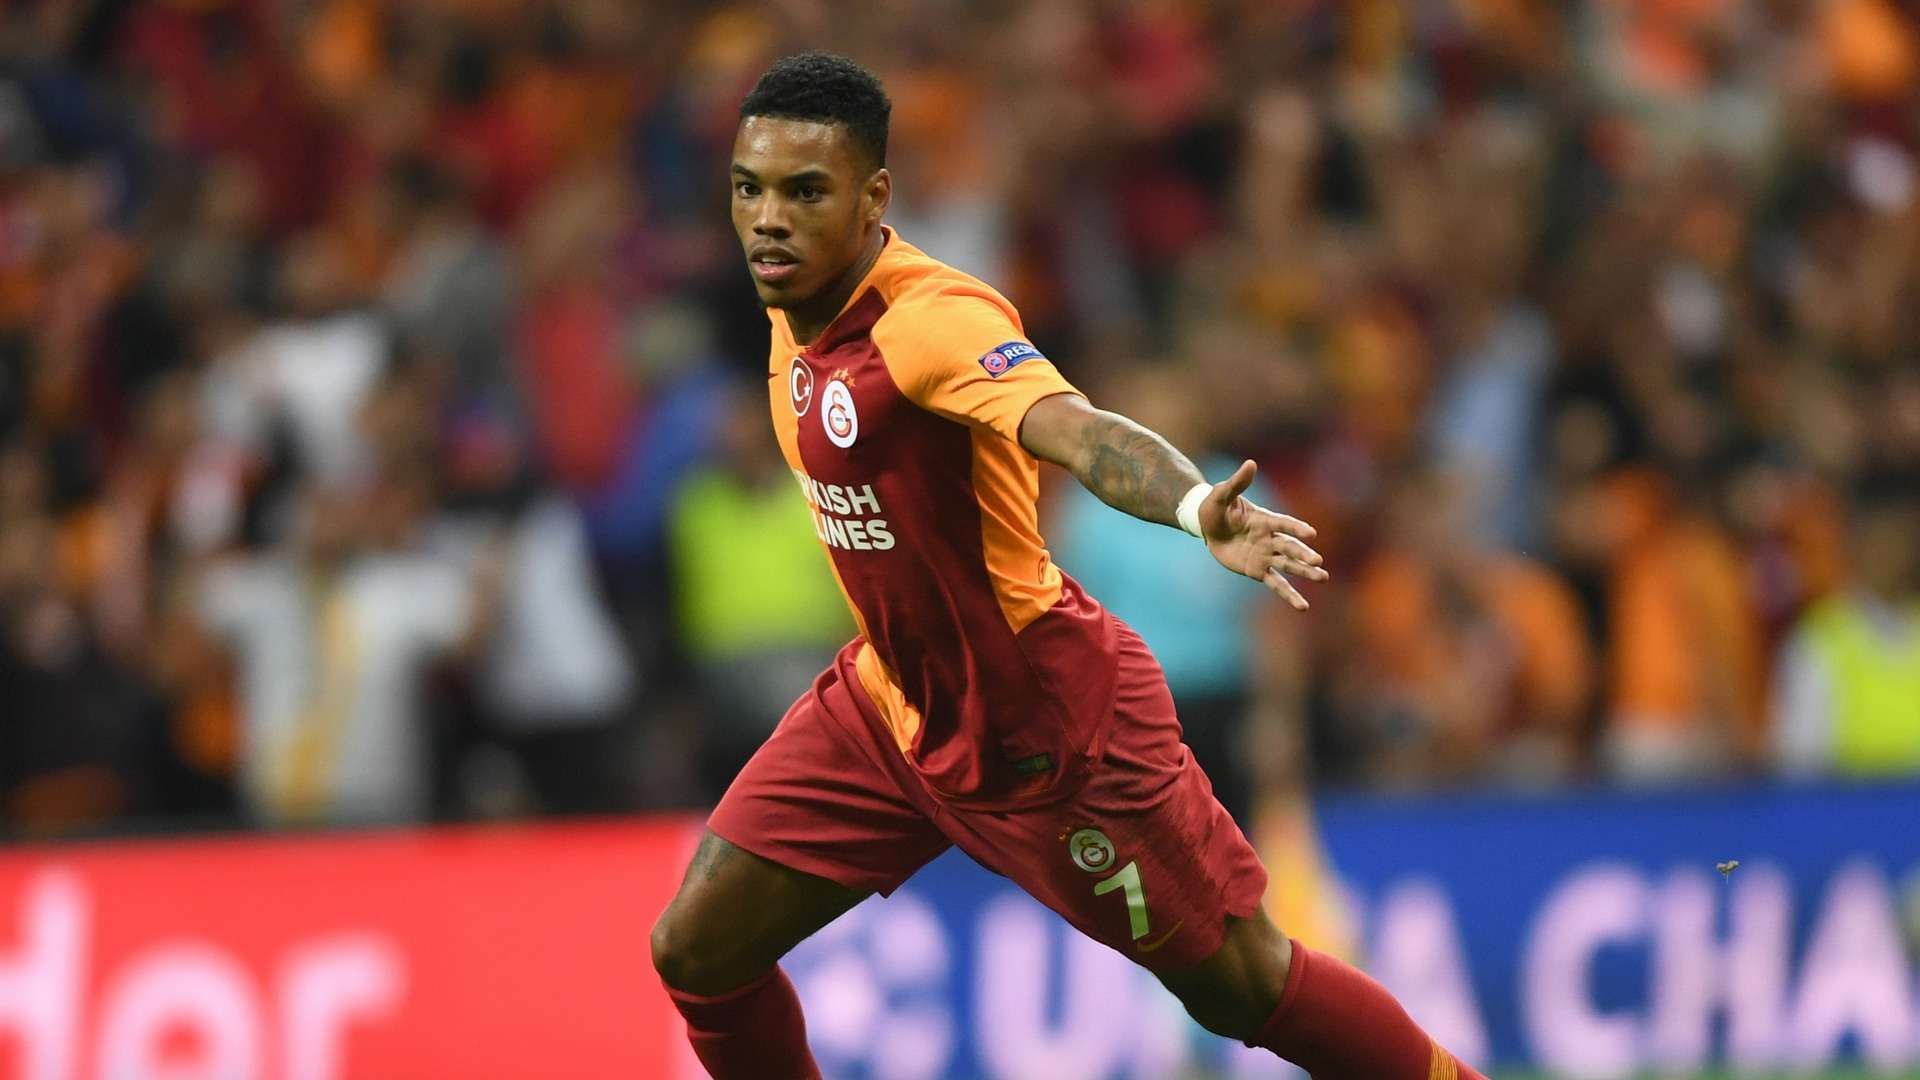 Garry Rodrigues Galatasaray 9182018 UCL